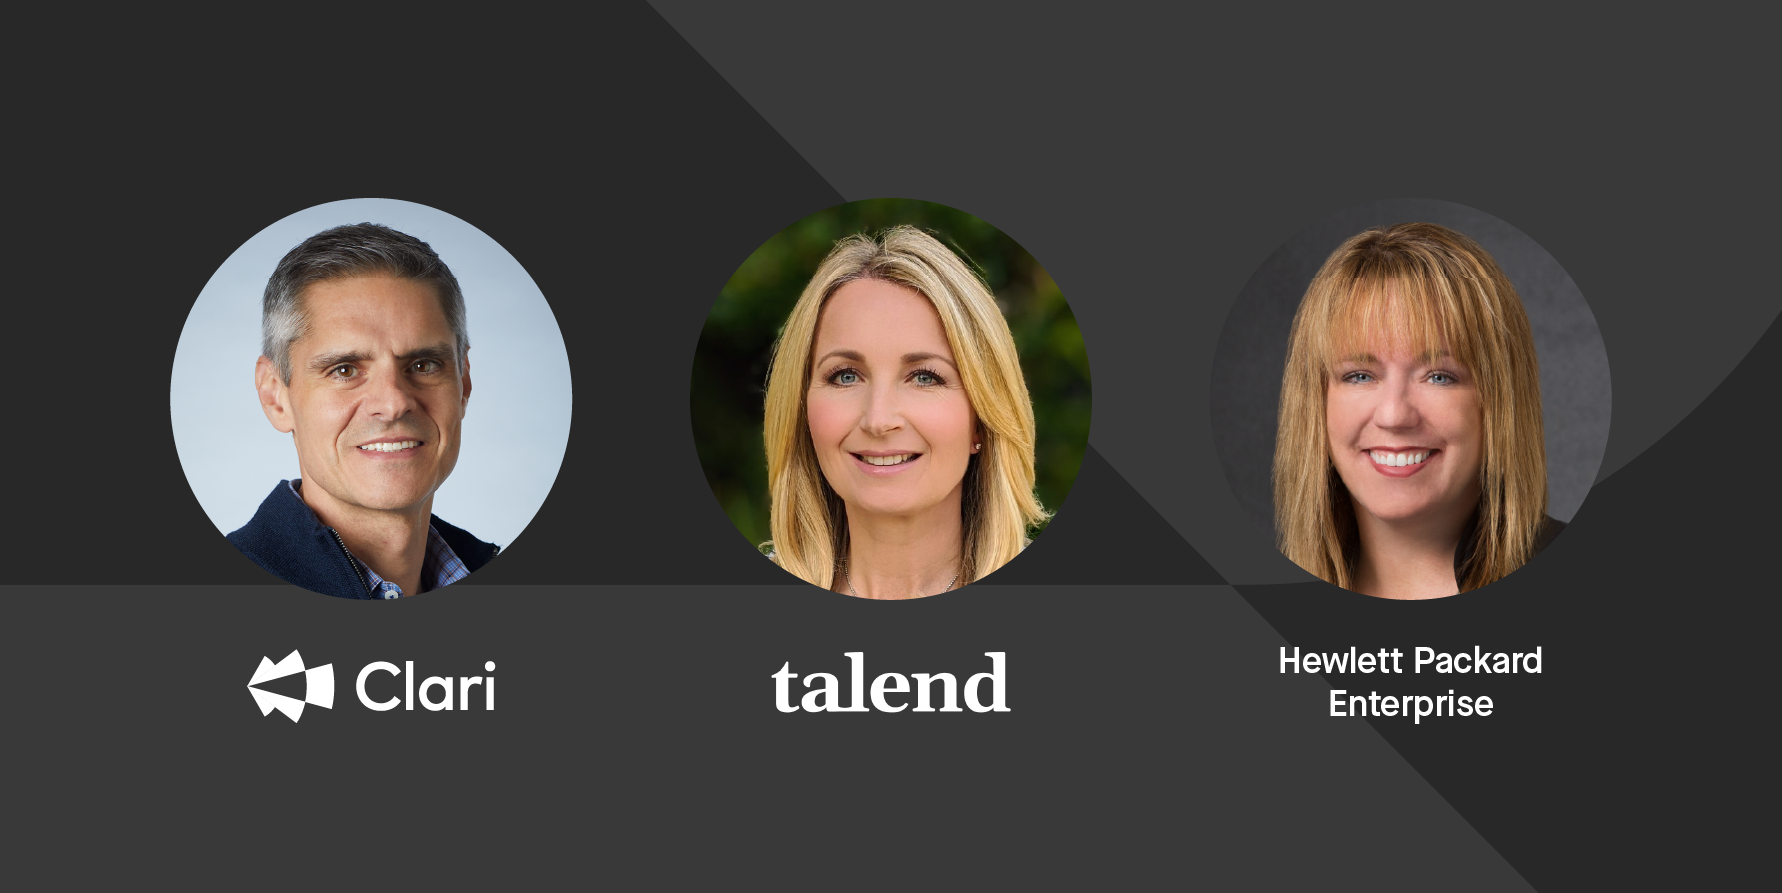 Headshots of Kevin Knieriem, CRO at Clari, Ann-Christel Graham, CRO at Talend, and Anne Bolton, Vice President of Sales Experience at Hewlett Packard Enterprise